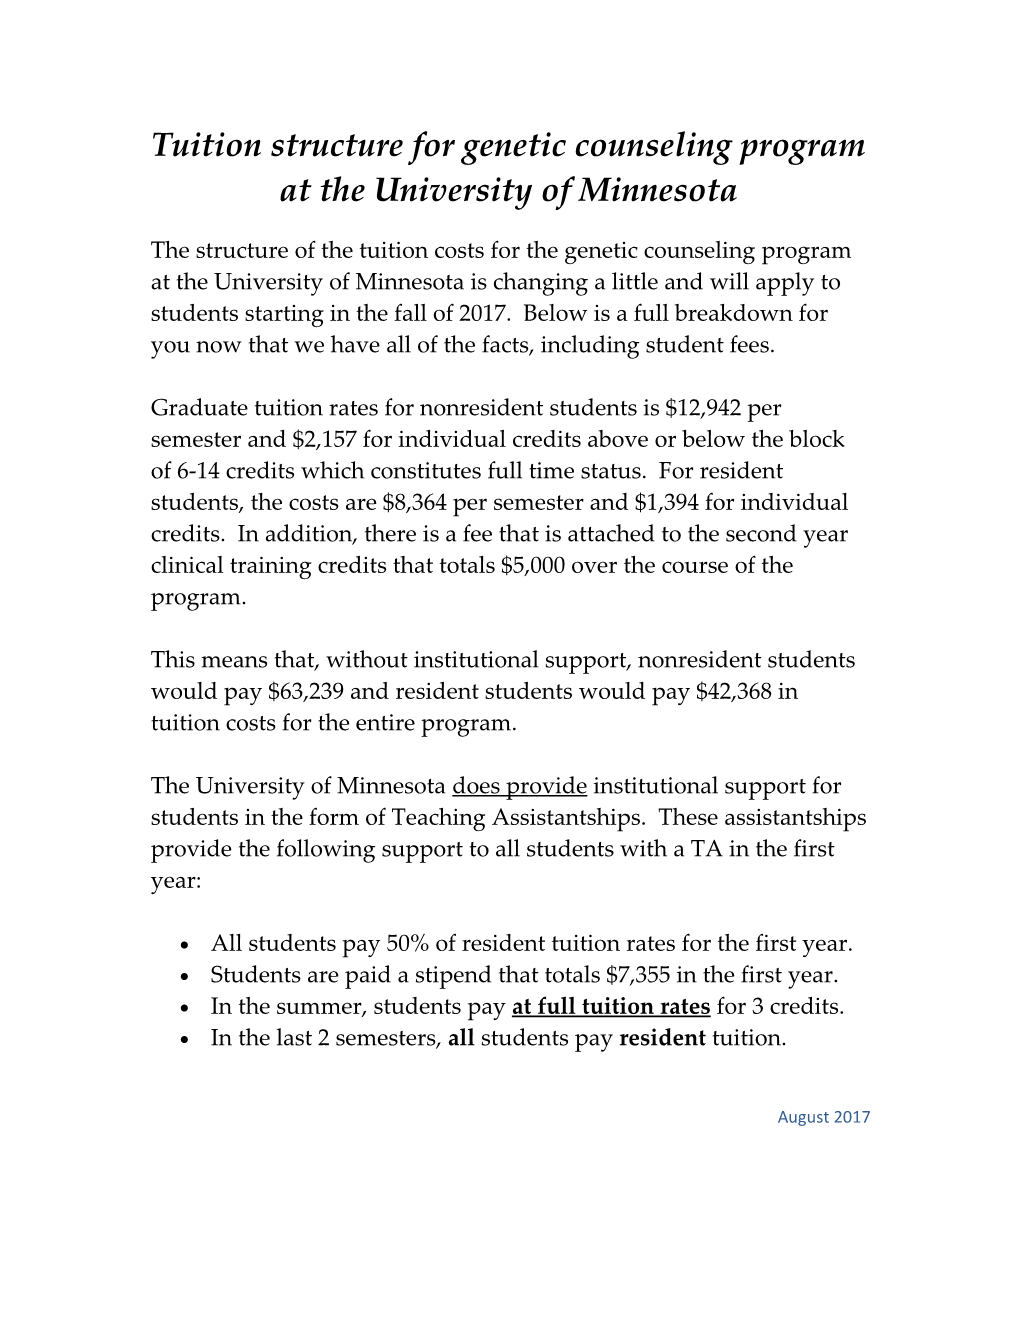 Tuition Structure for Genetic Counseling Program at the University of Minnesota